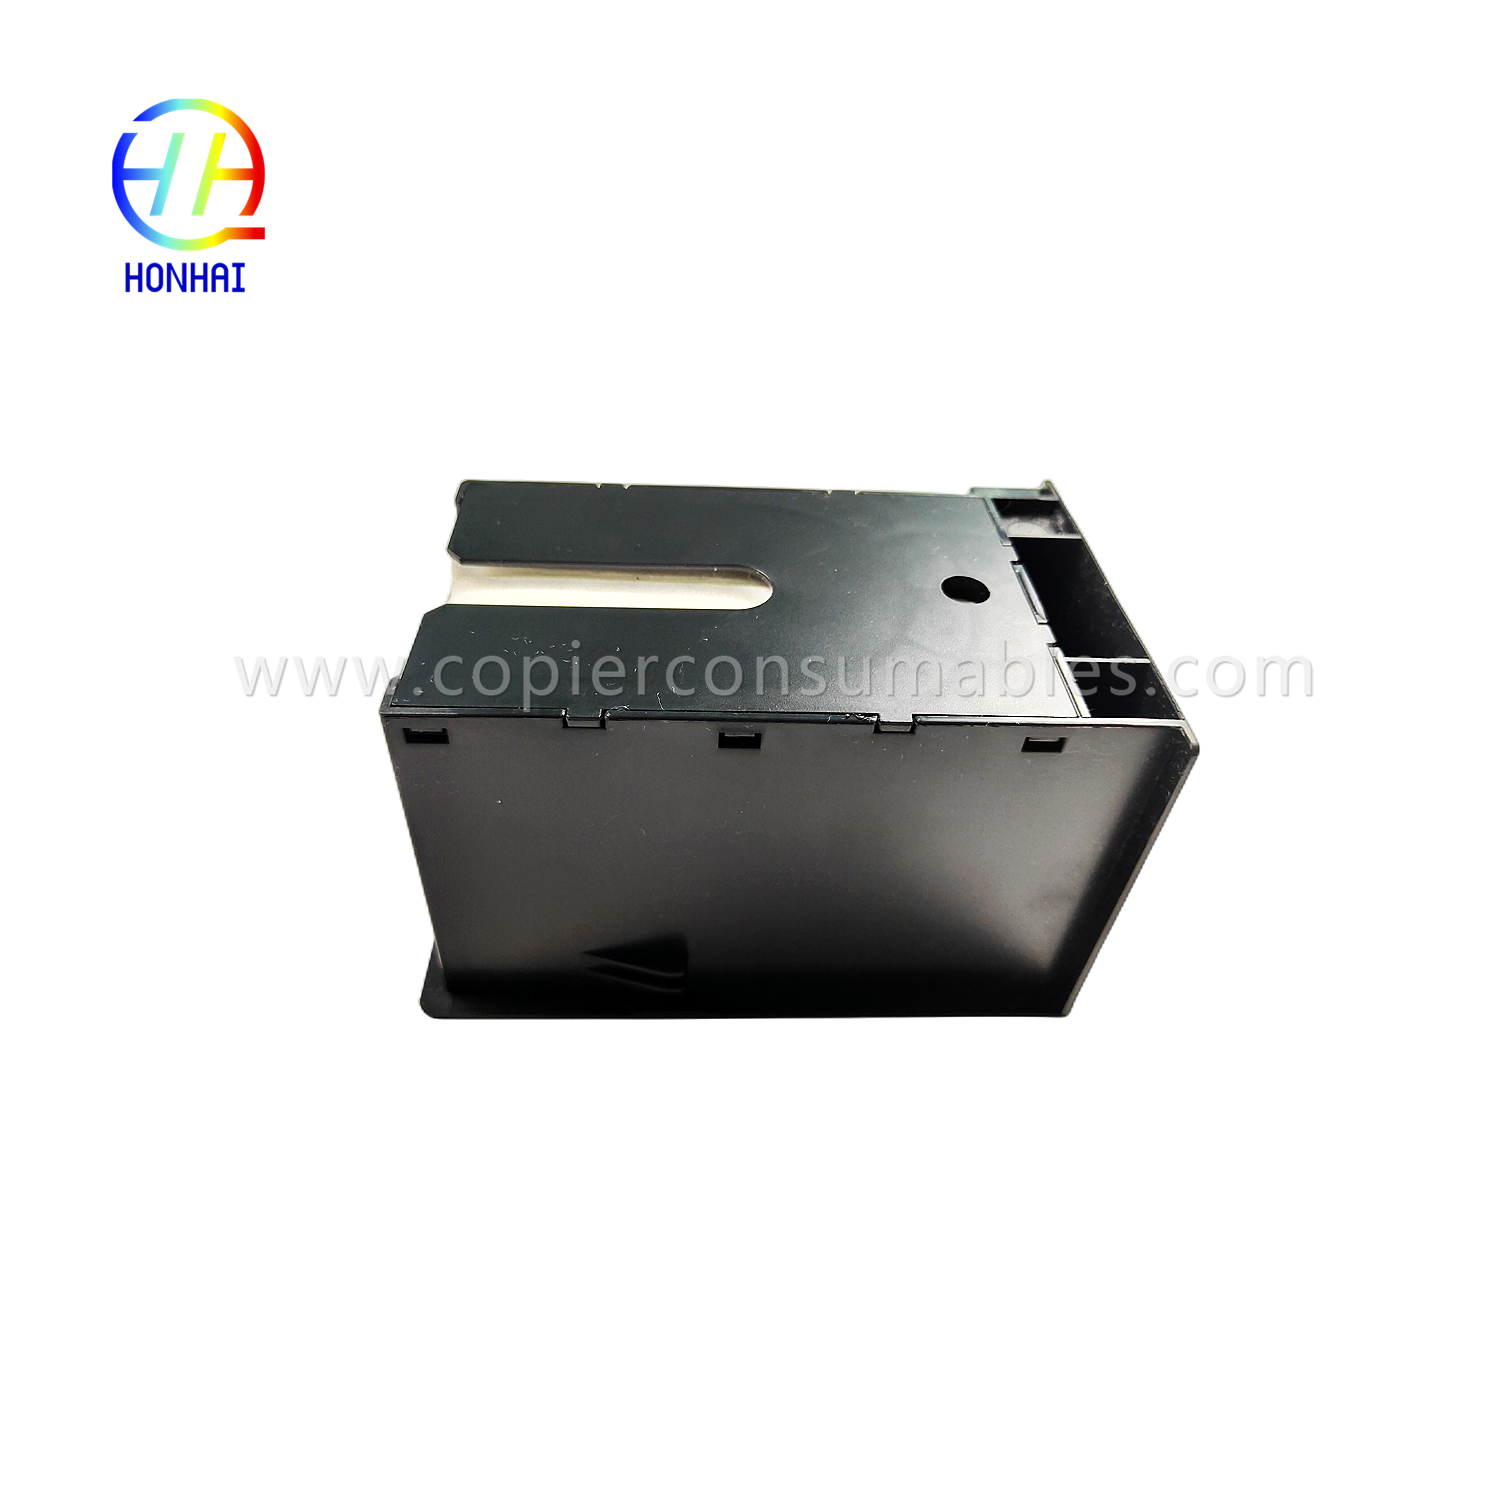 https://c585.goodao.net/waste-box-for-epson-workforce-wp-4535-4540-4545-4590-4595-m4015-m4095-m4525-m4595-t6710-product/